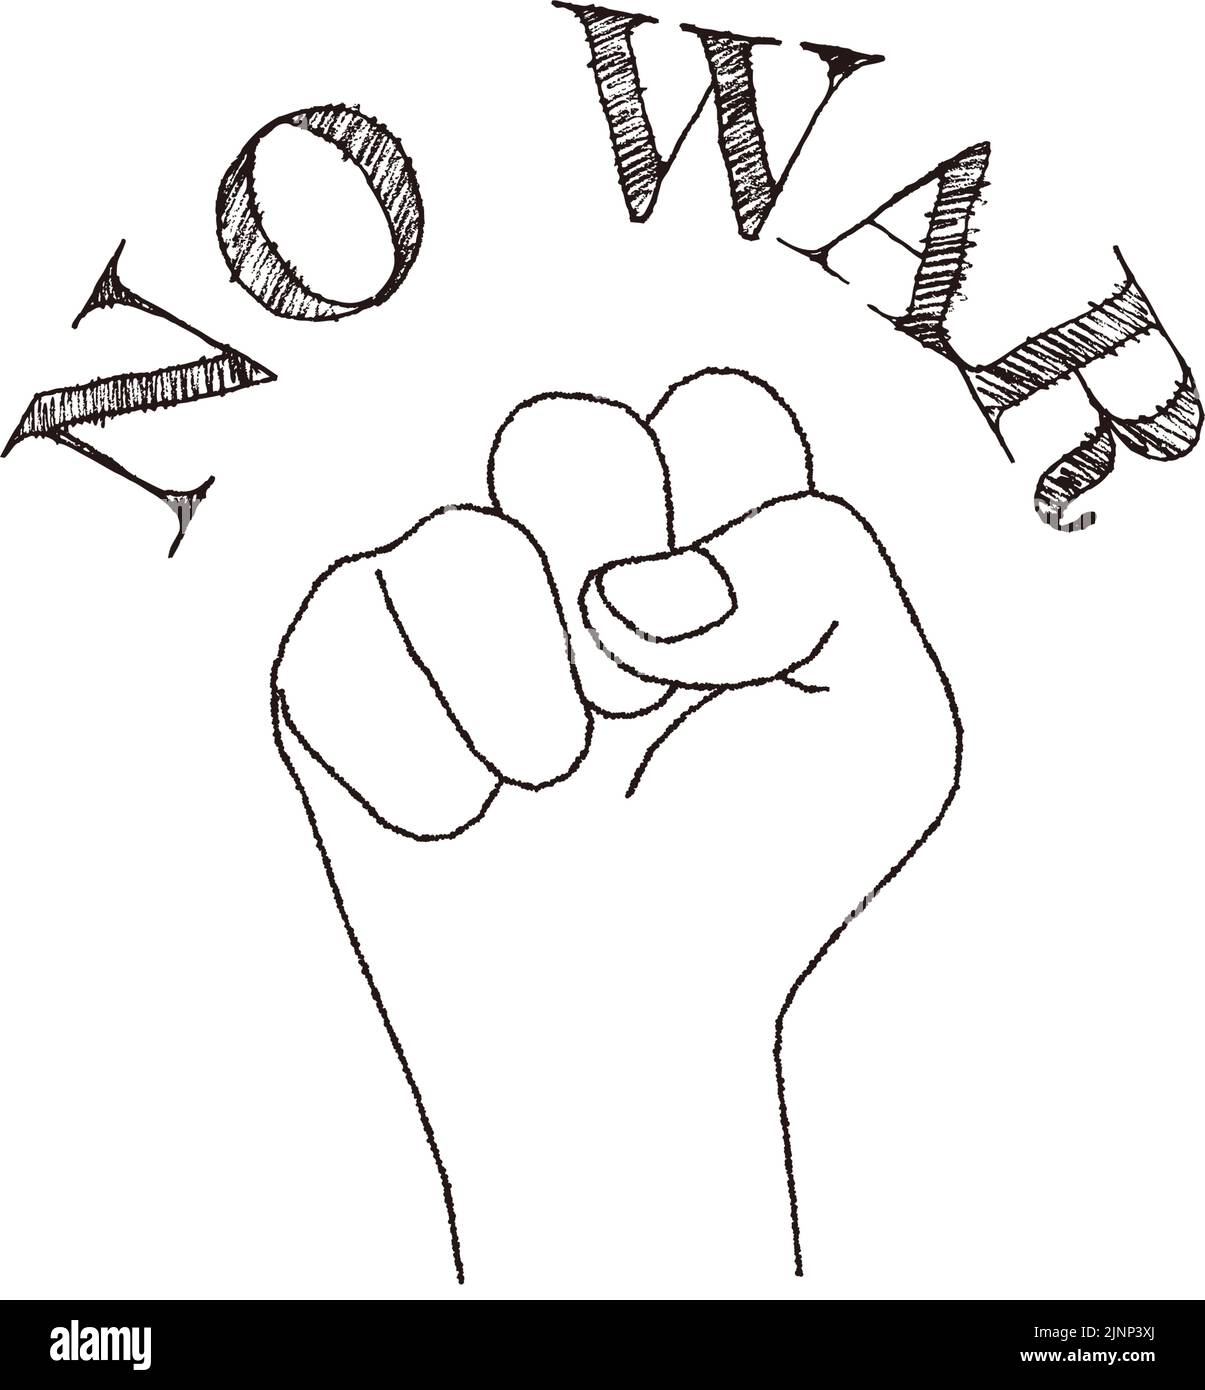 A message of 'No War' and a fist raised in opposition to war. Stock Vector